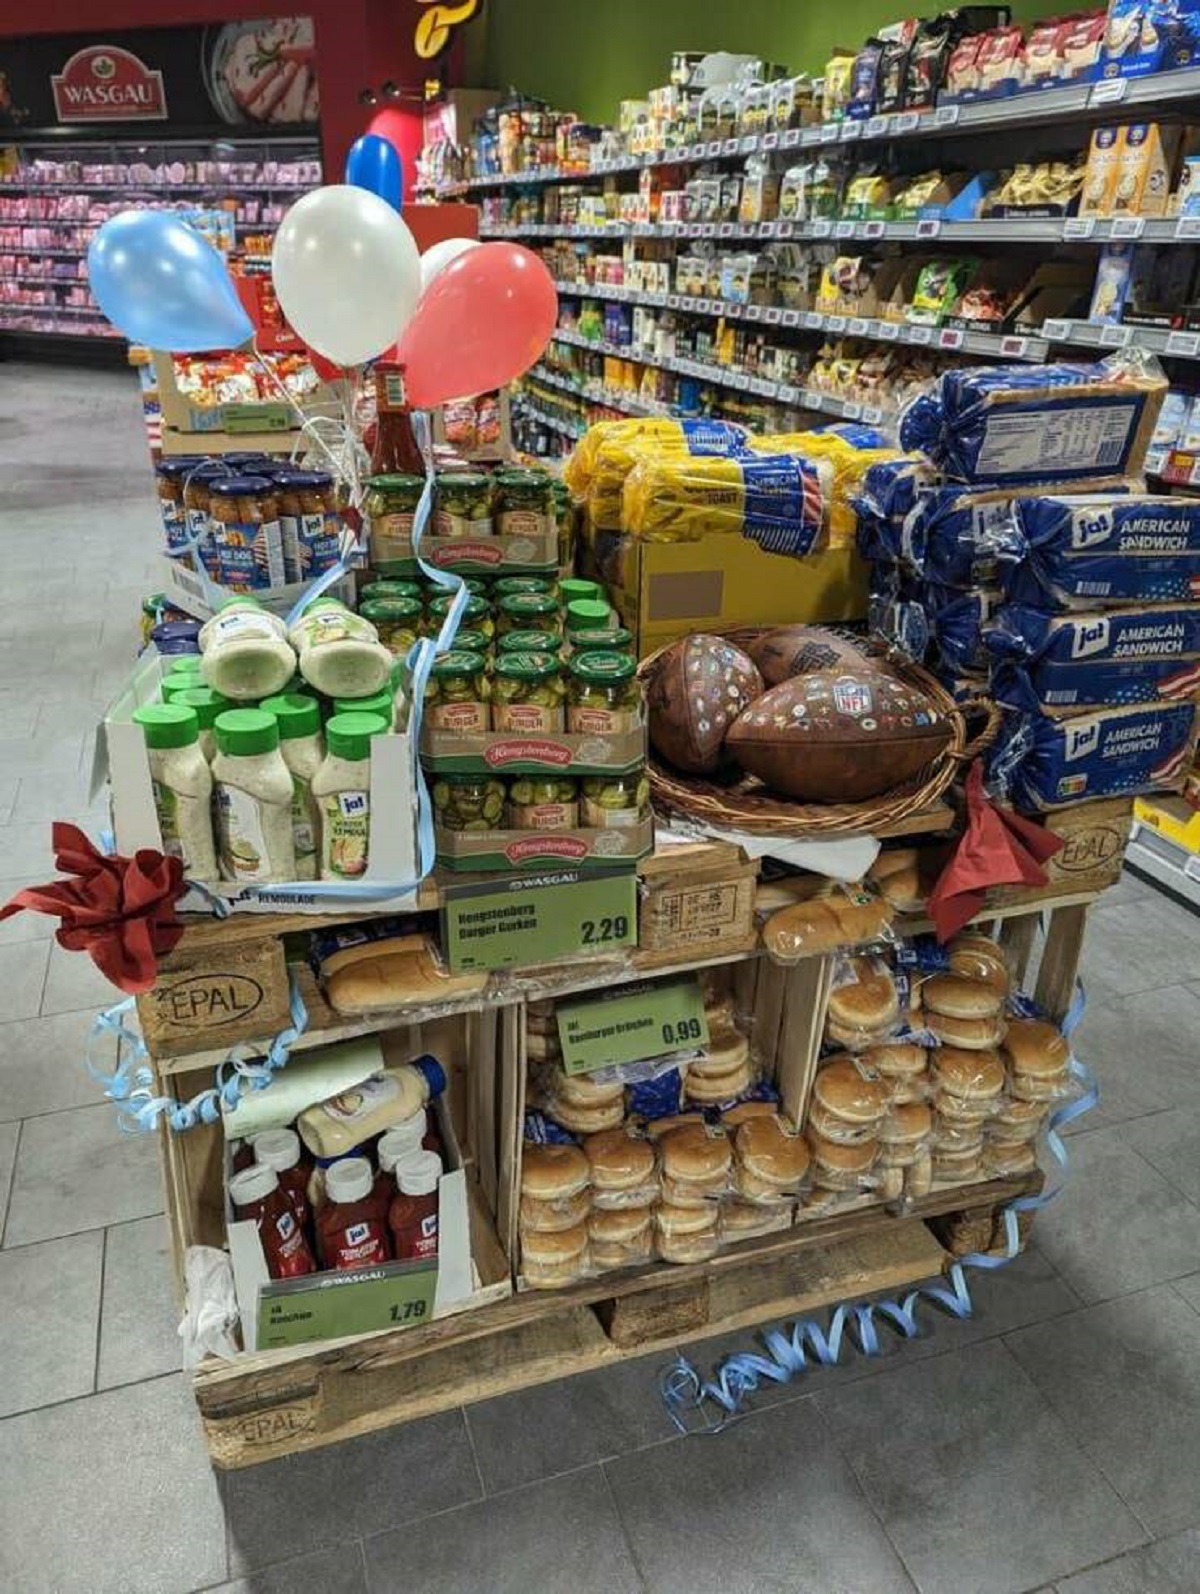 This is the "American Super Bowl" section of a German grocery store: